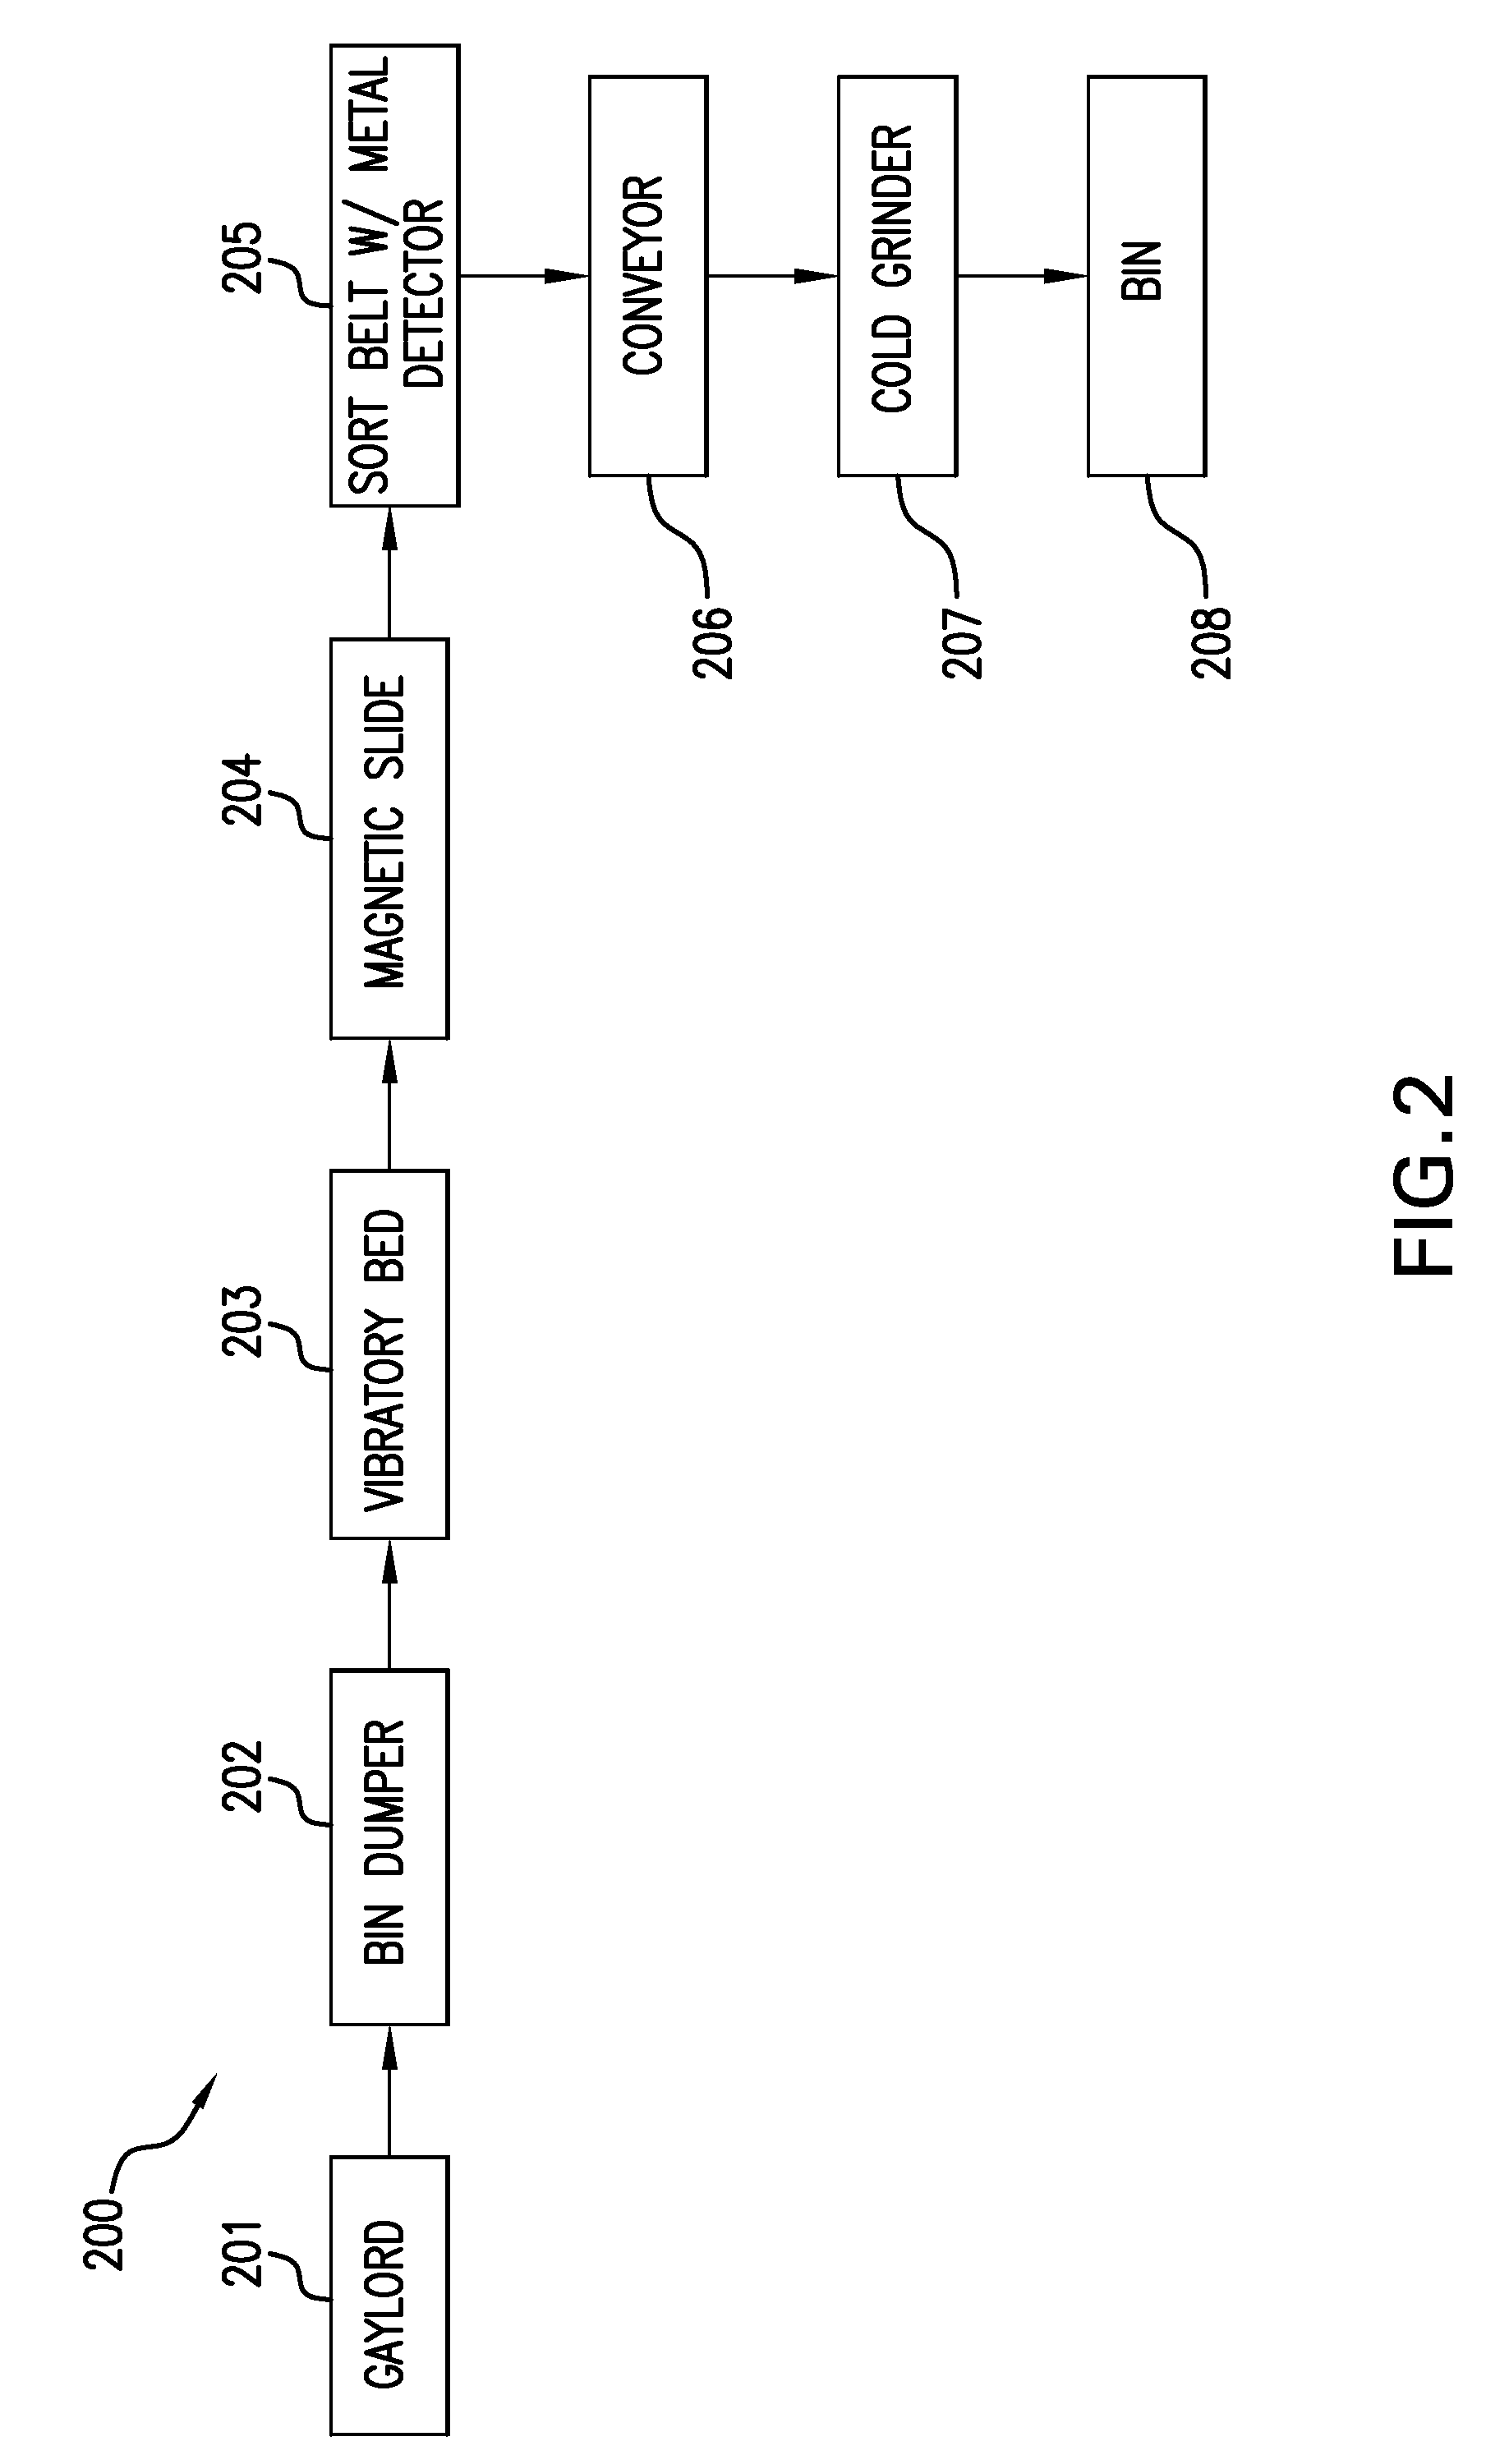 Surface Coverings Containing Reclaimed VCT Material, and Methods and Systems For Making and Using Them